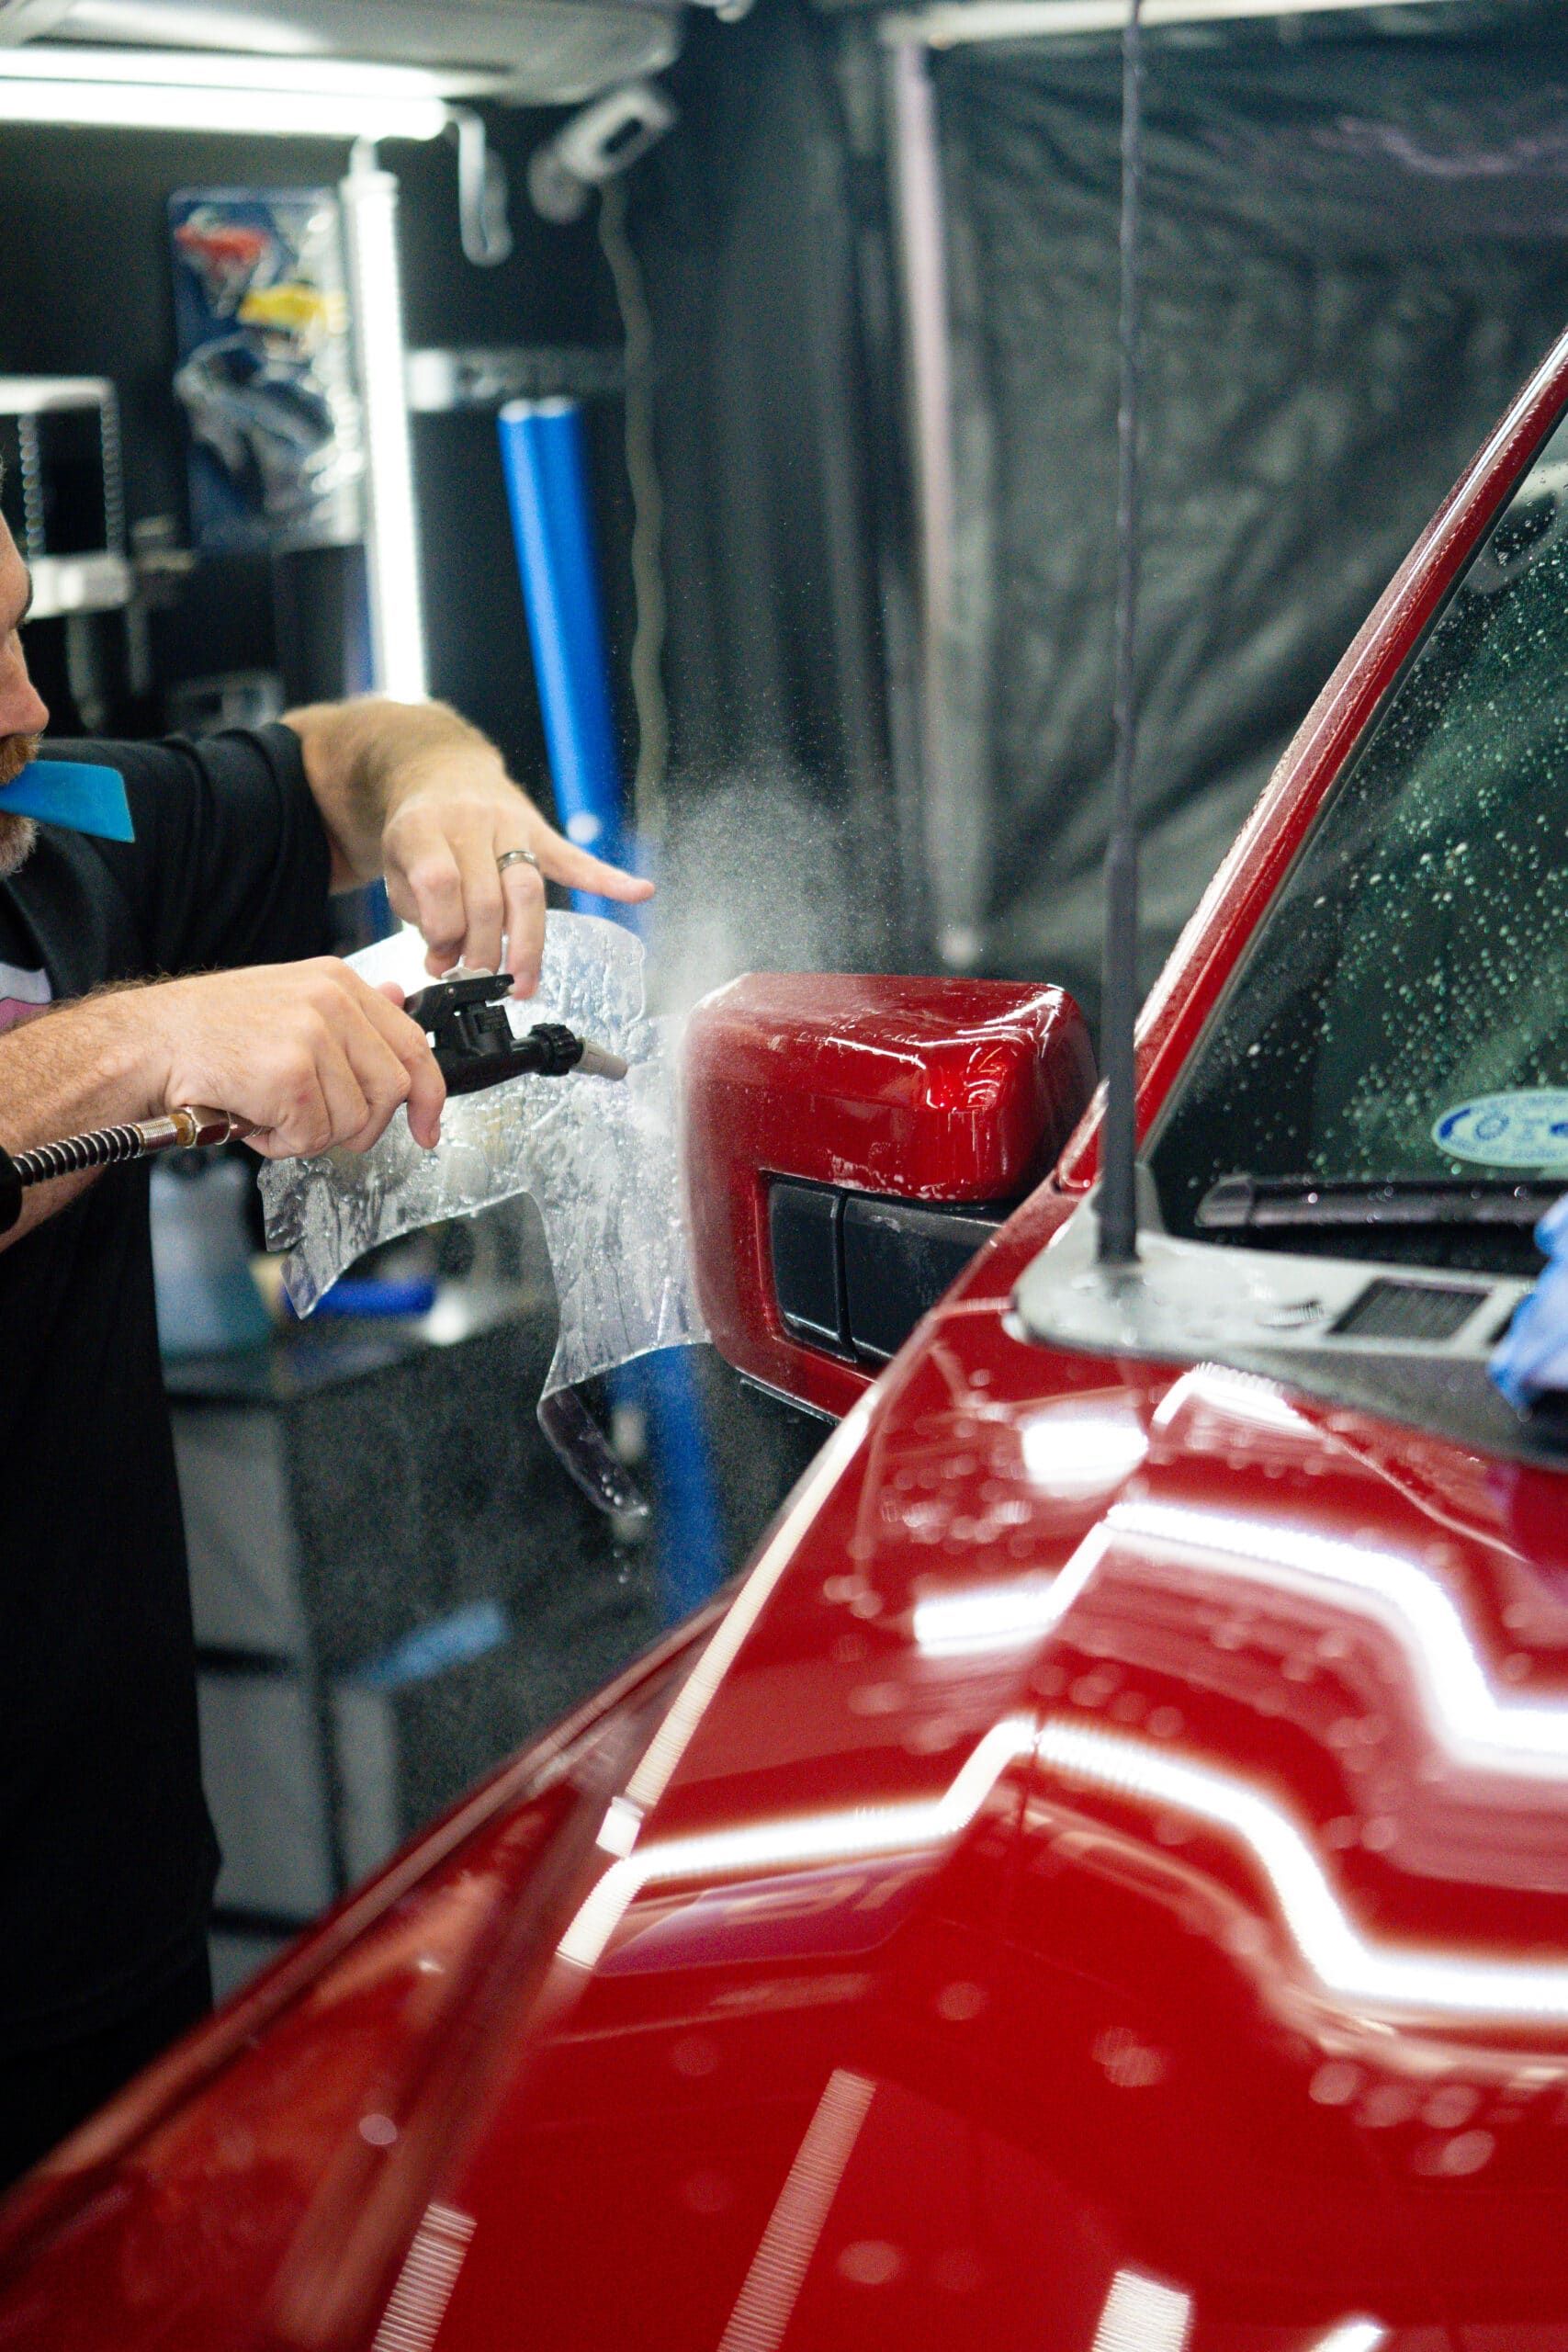 A man is spraying a red car with a spray bottle.